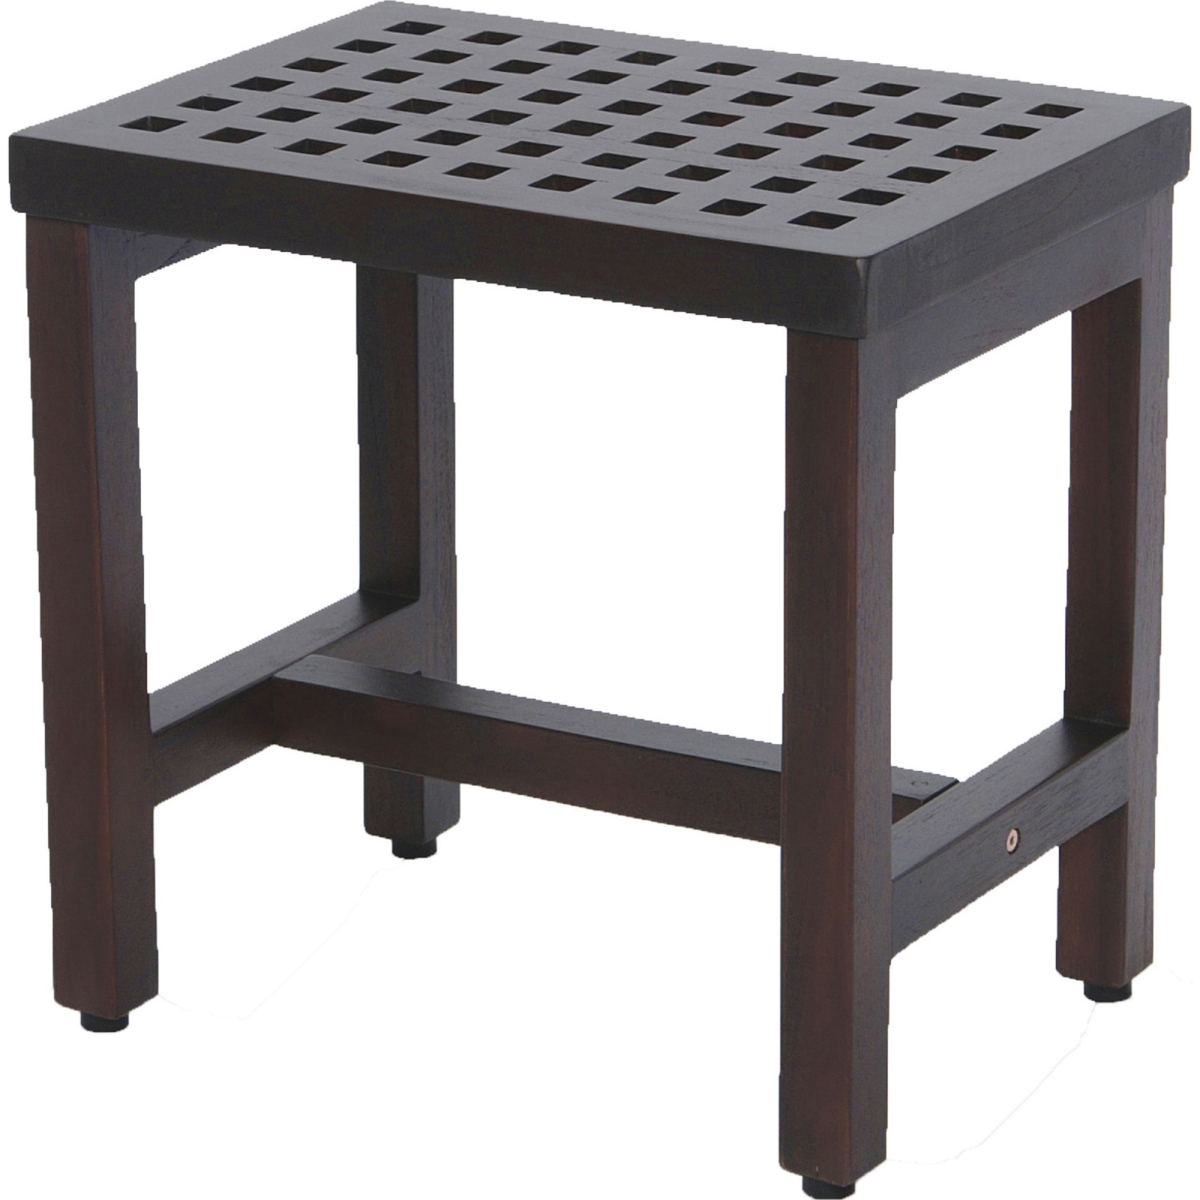 Picture of HomeRoots 376692 Compact Rectangular Teak Lattice Pattern Shower or Outdoor Bench in Brown Finish